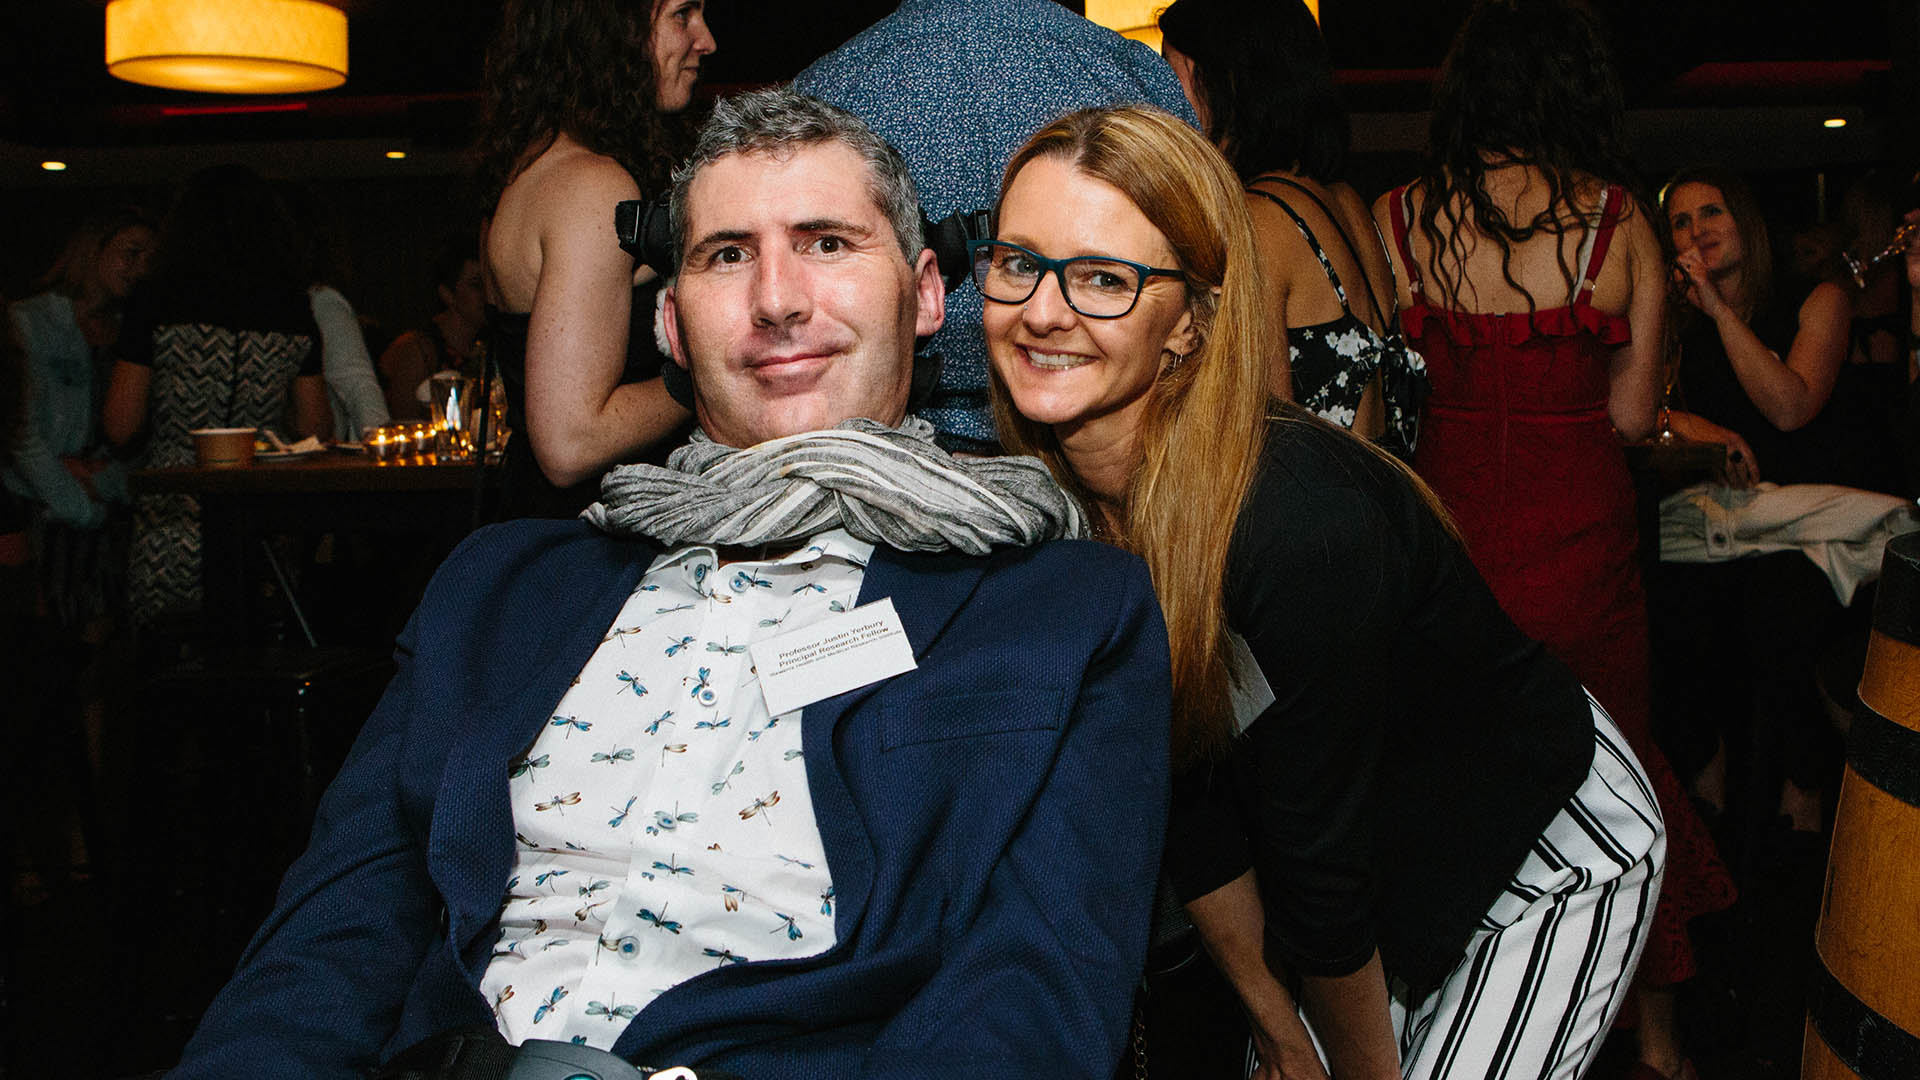 Professor Justin Yerbury, who has amyotrophic lateral sclerosis (ALS), and his wife, Dr Rachel Yerbury